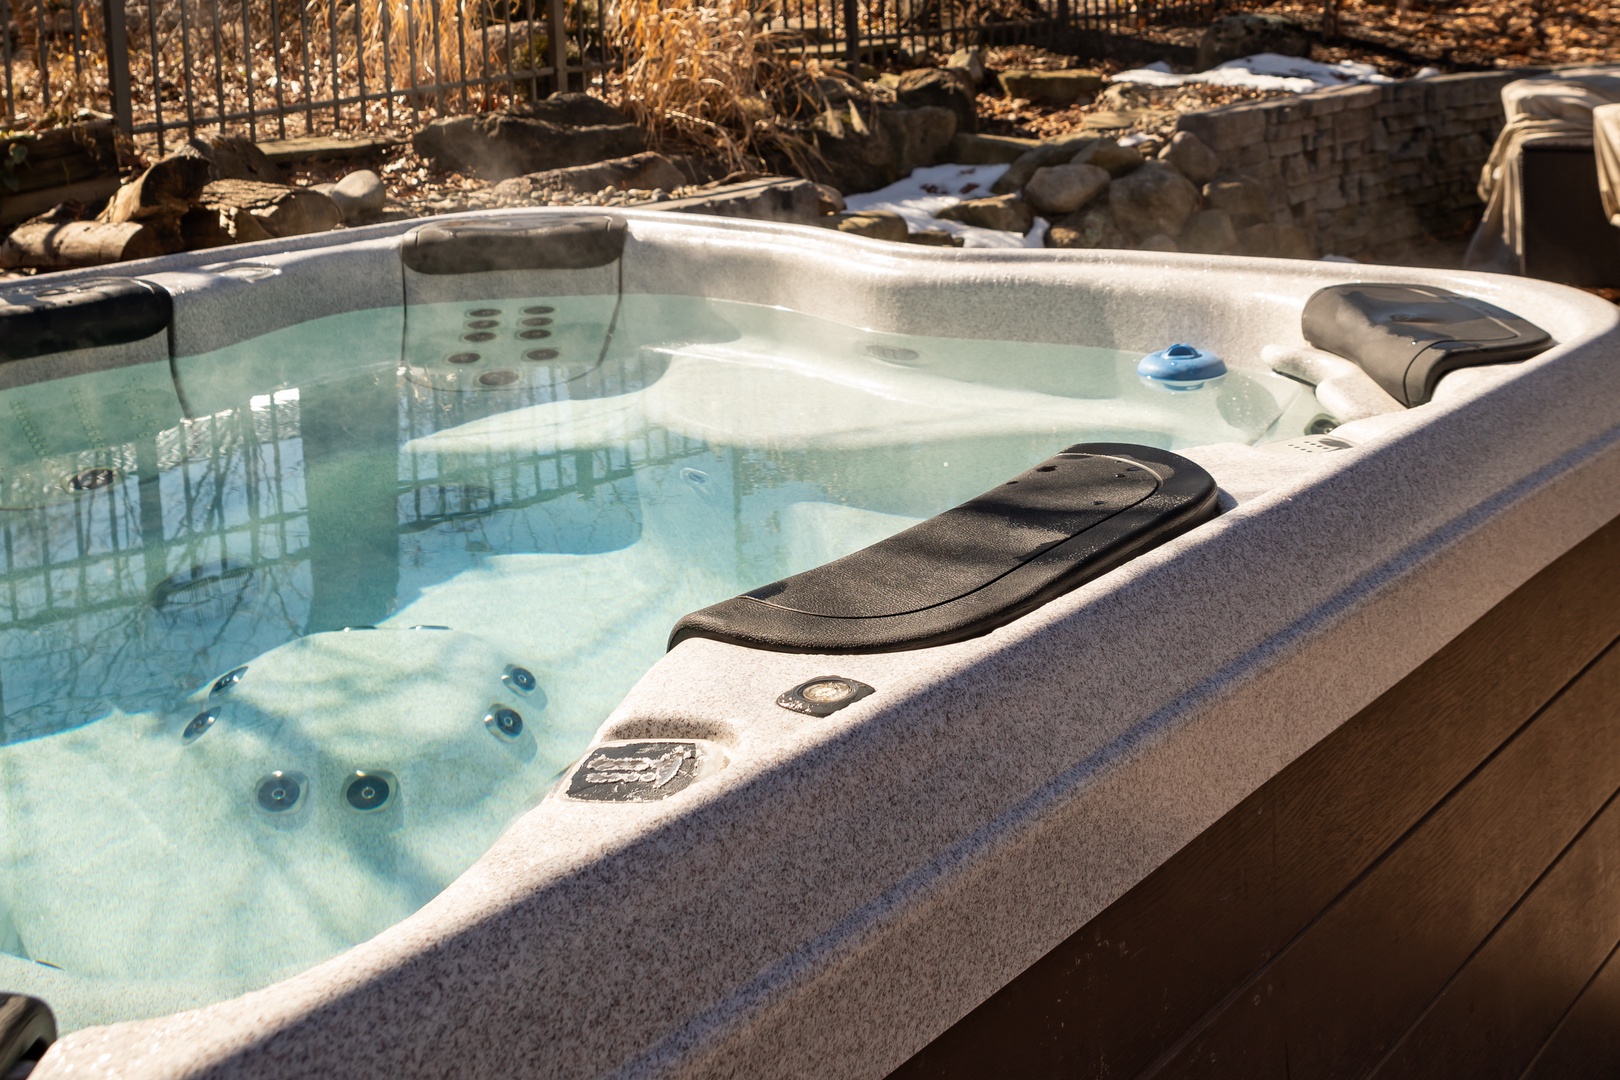 Spend evenings stargazing and relaxing in the oversized hot tub.